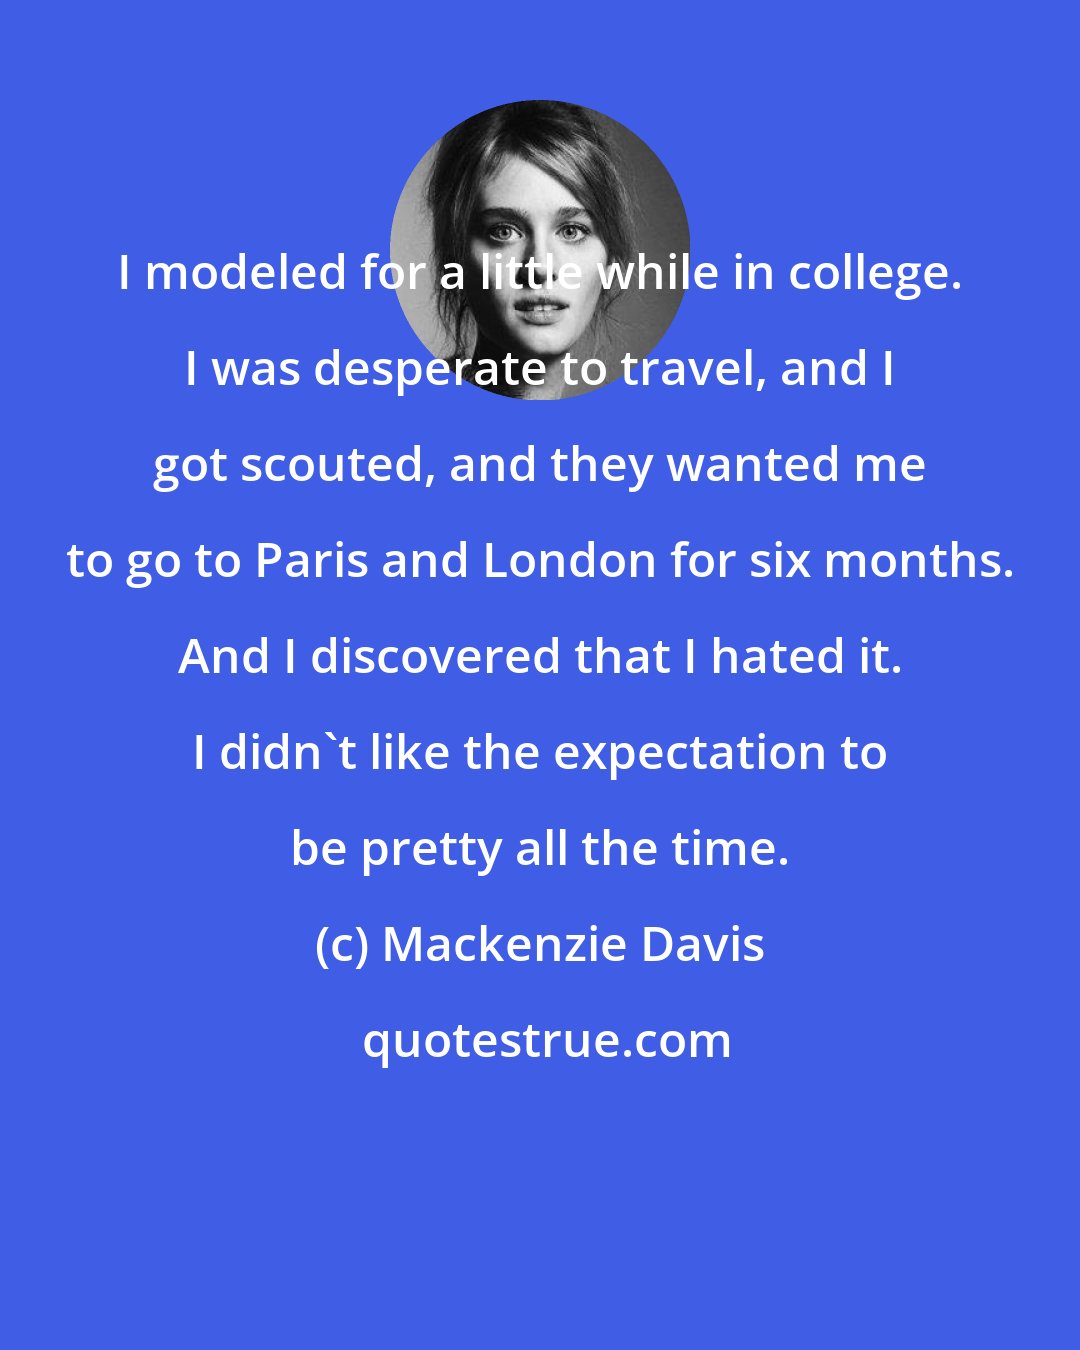 Mackenzie Davis: I modeled for a little while in college. I was desperate to travel, and I got scouted, and they wanted me to go to Paris and London for six months. And I discovered that I hated it. I didn't like the expectation to be pretty all the time.